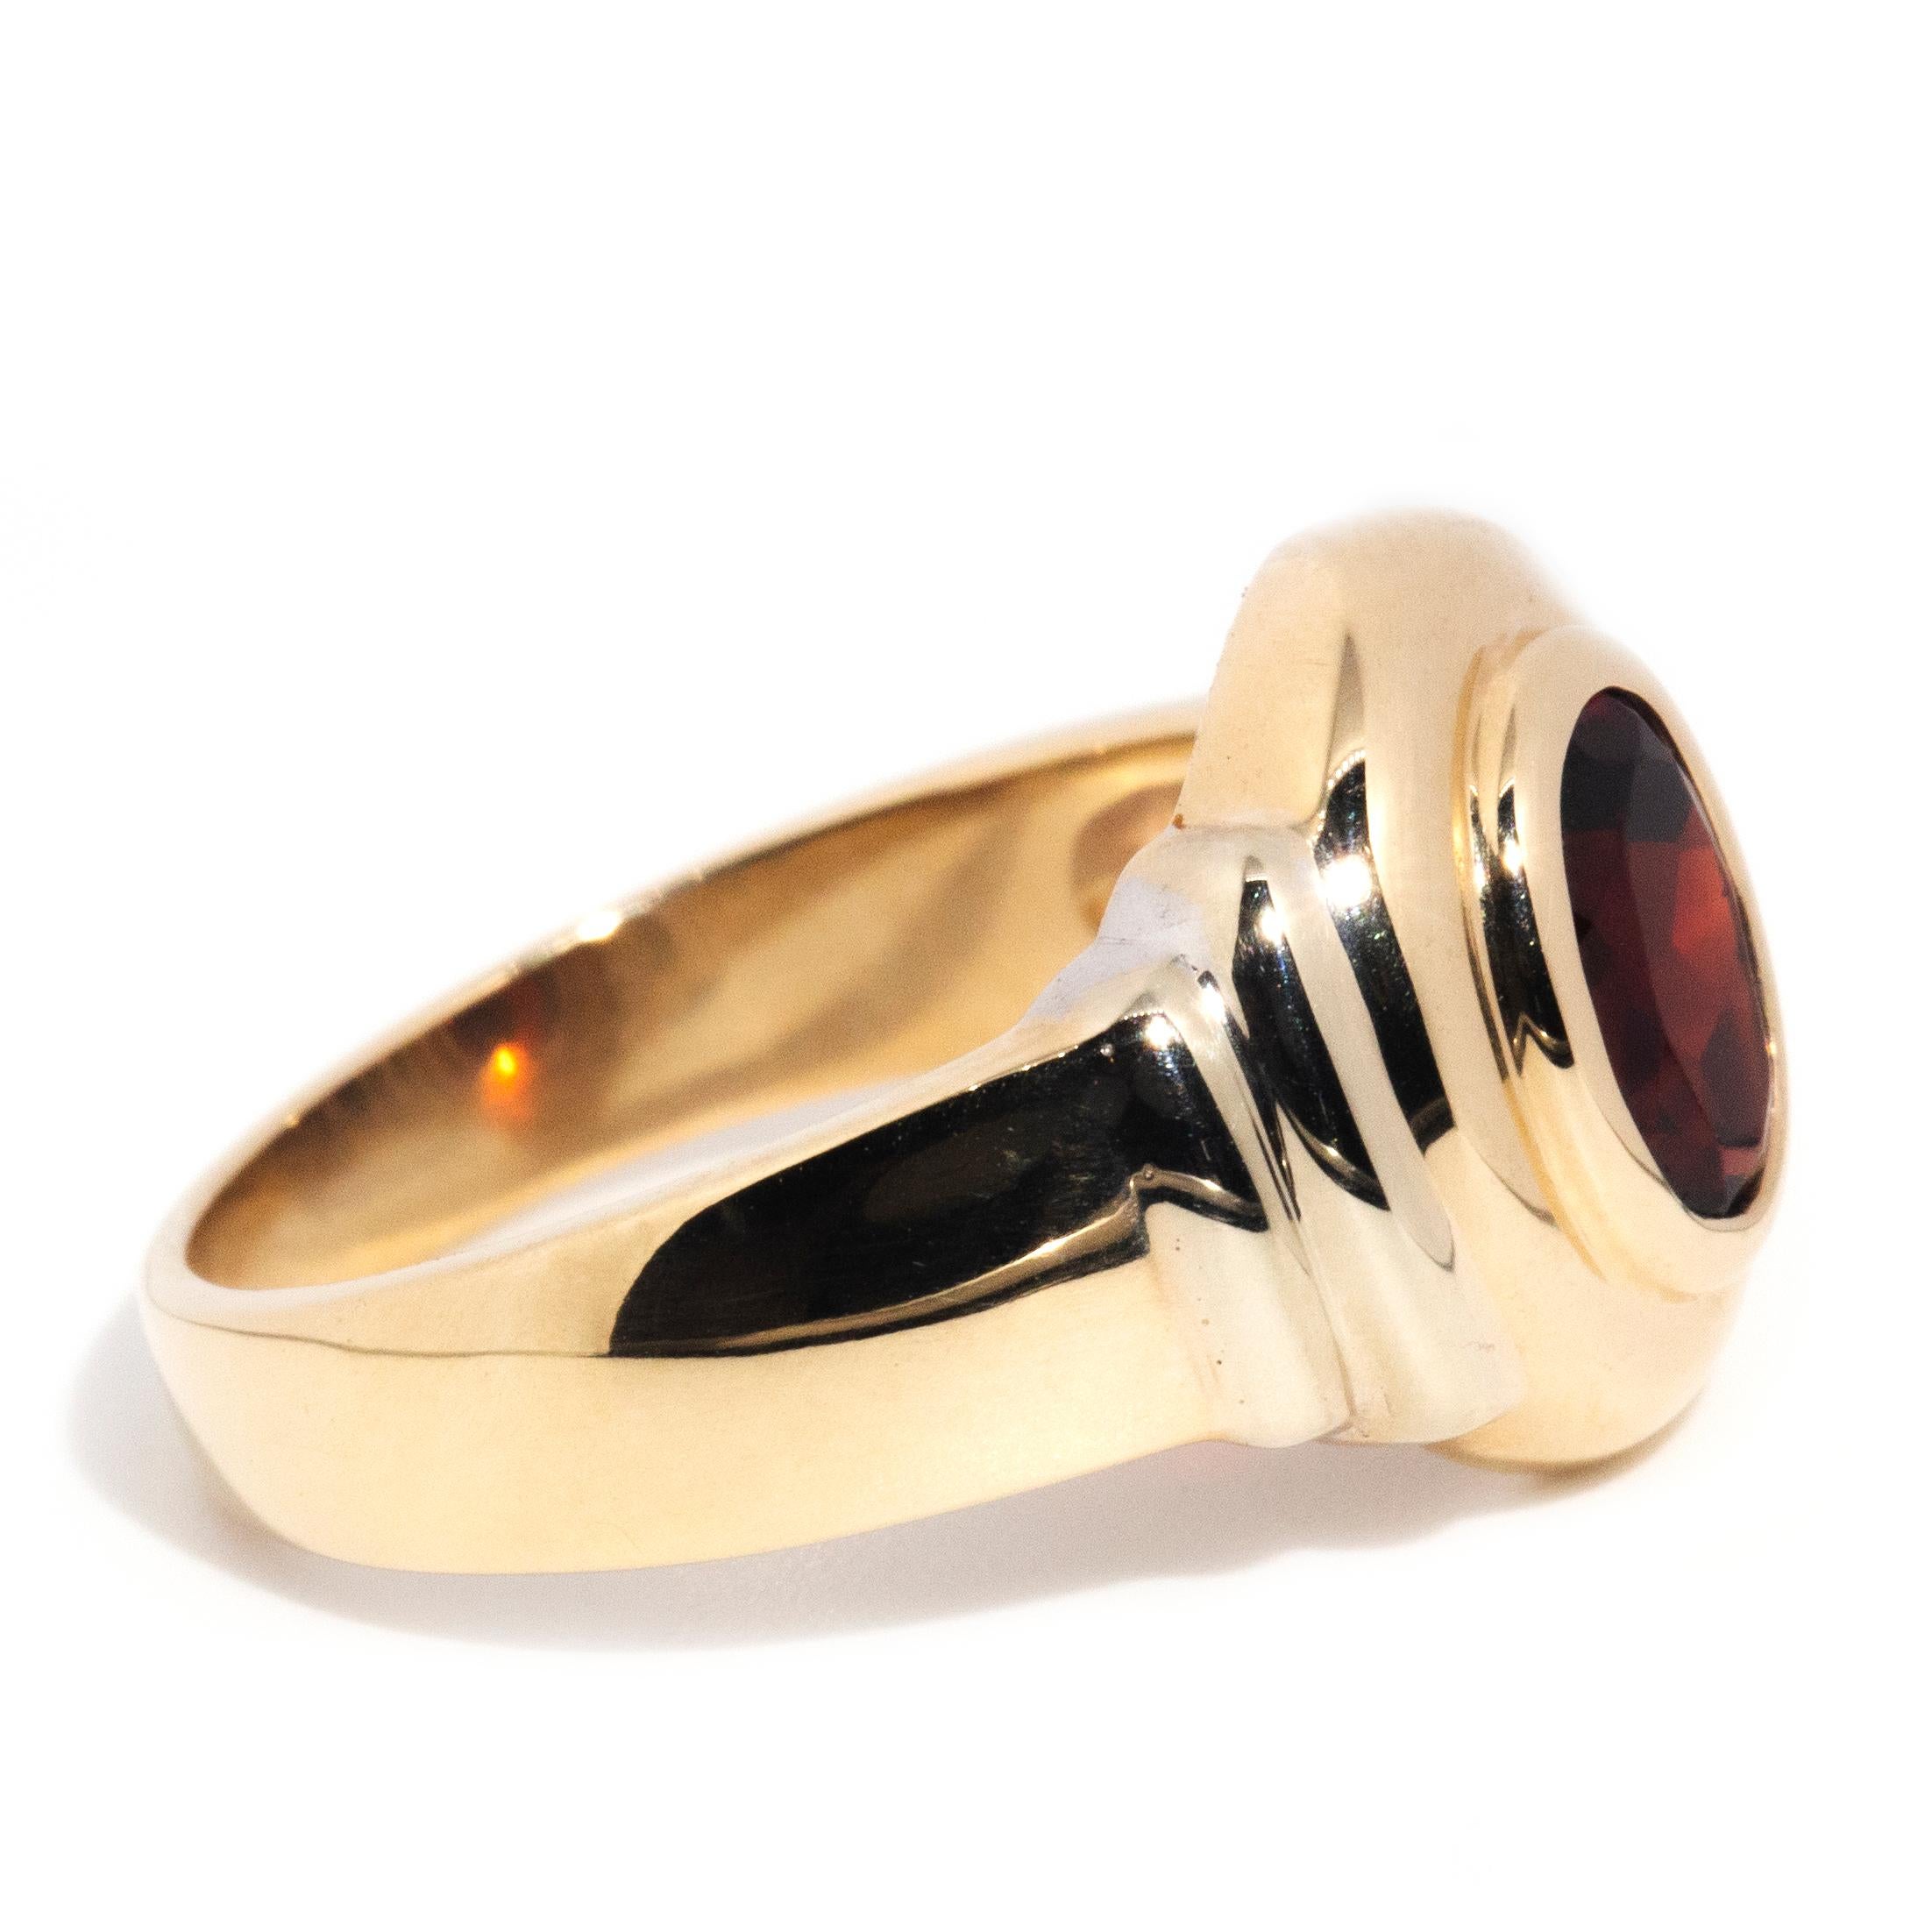 circa 1990s, Vintage 9 Carat Yellow Gold Double Rub over Oval Cut Garnet Ring For Sale 2